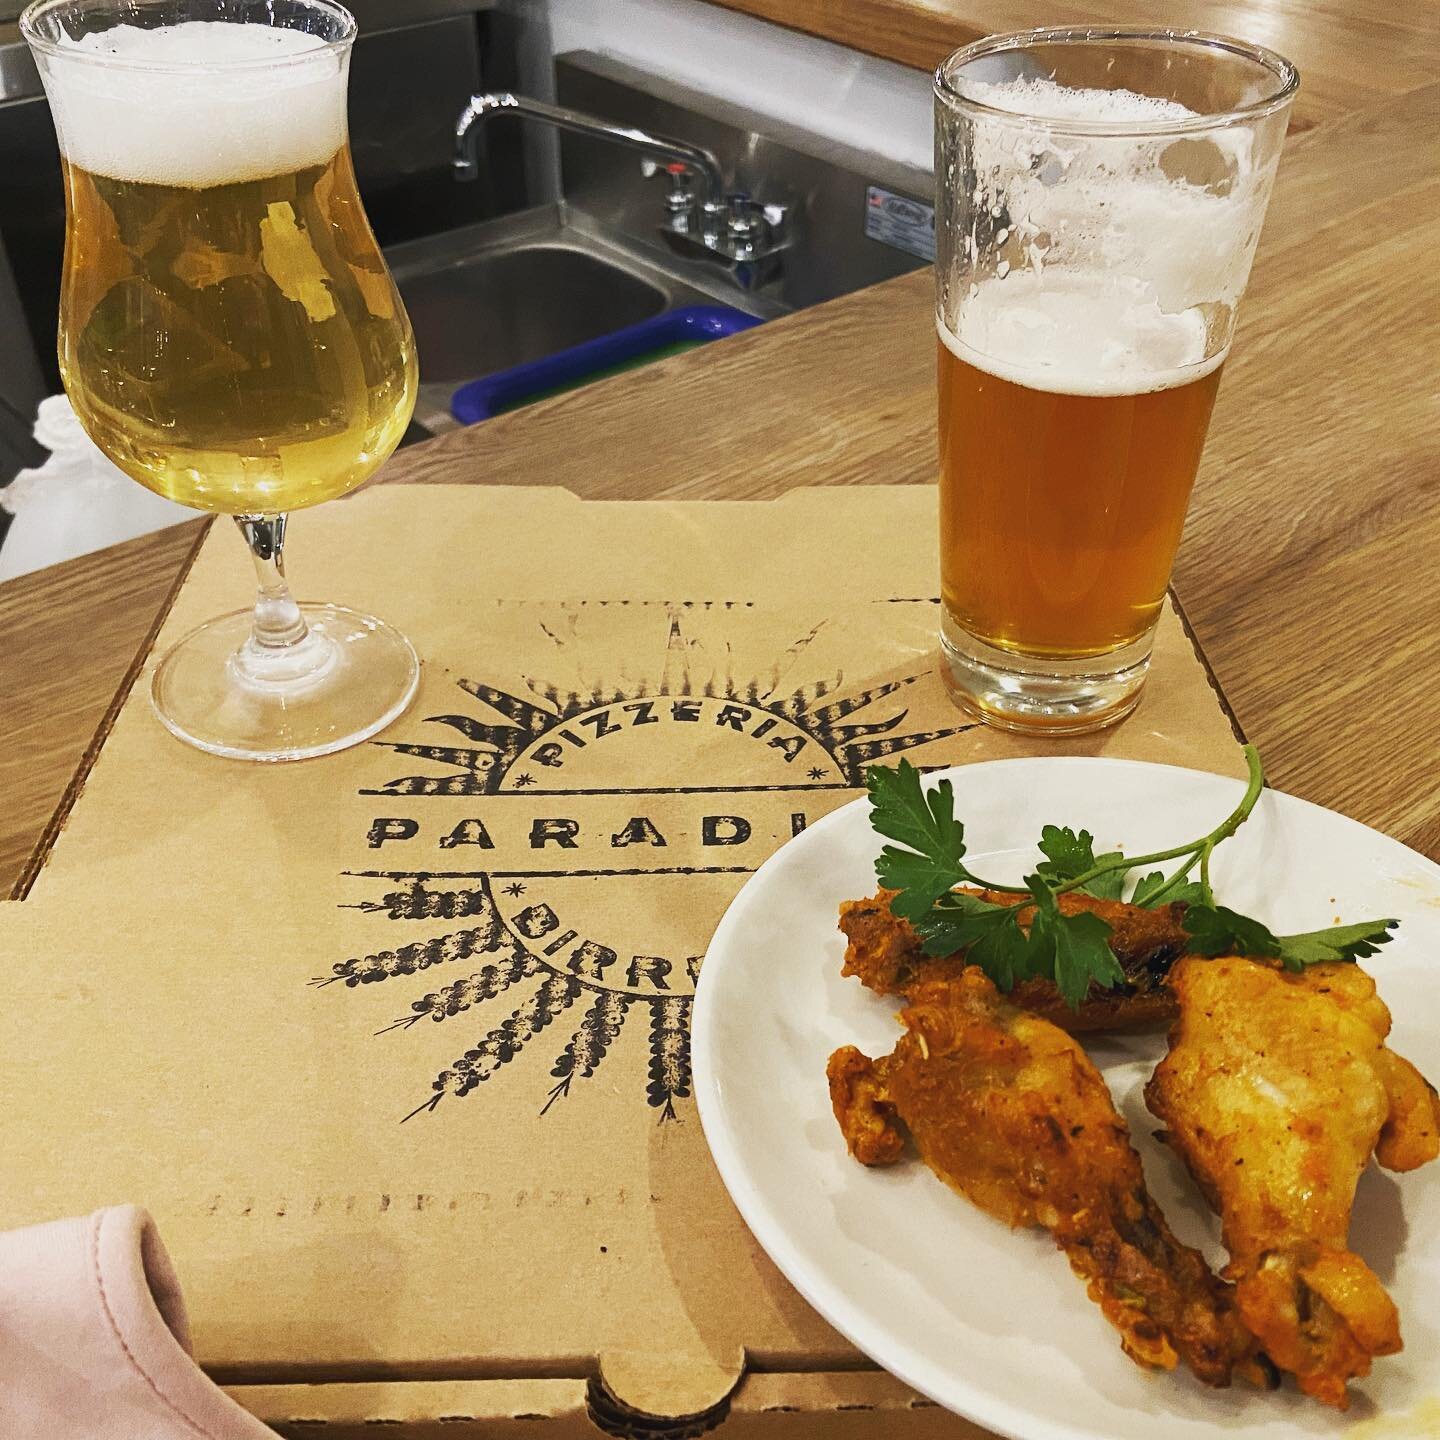 Picked up dinner and excited to find out that Pizzeria Paradiso now has wings on their menu! And they&rsquo;re good! #svnadc #eatlocal #pizzeriaparadiso #svna